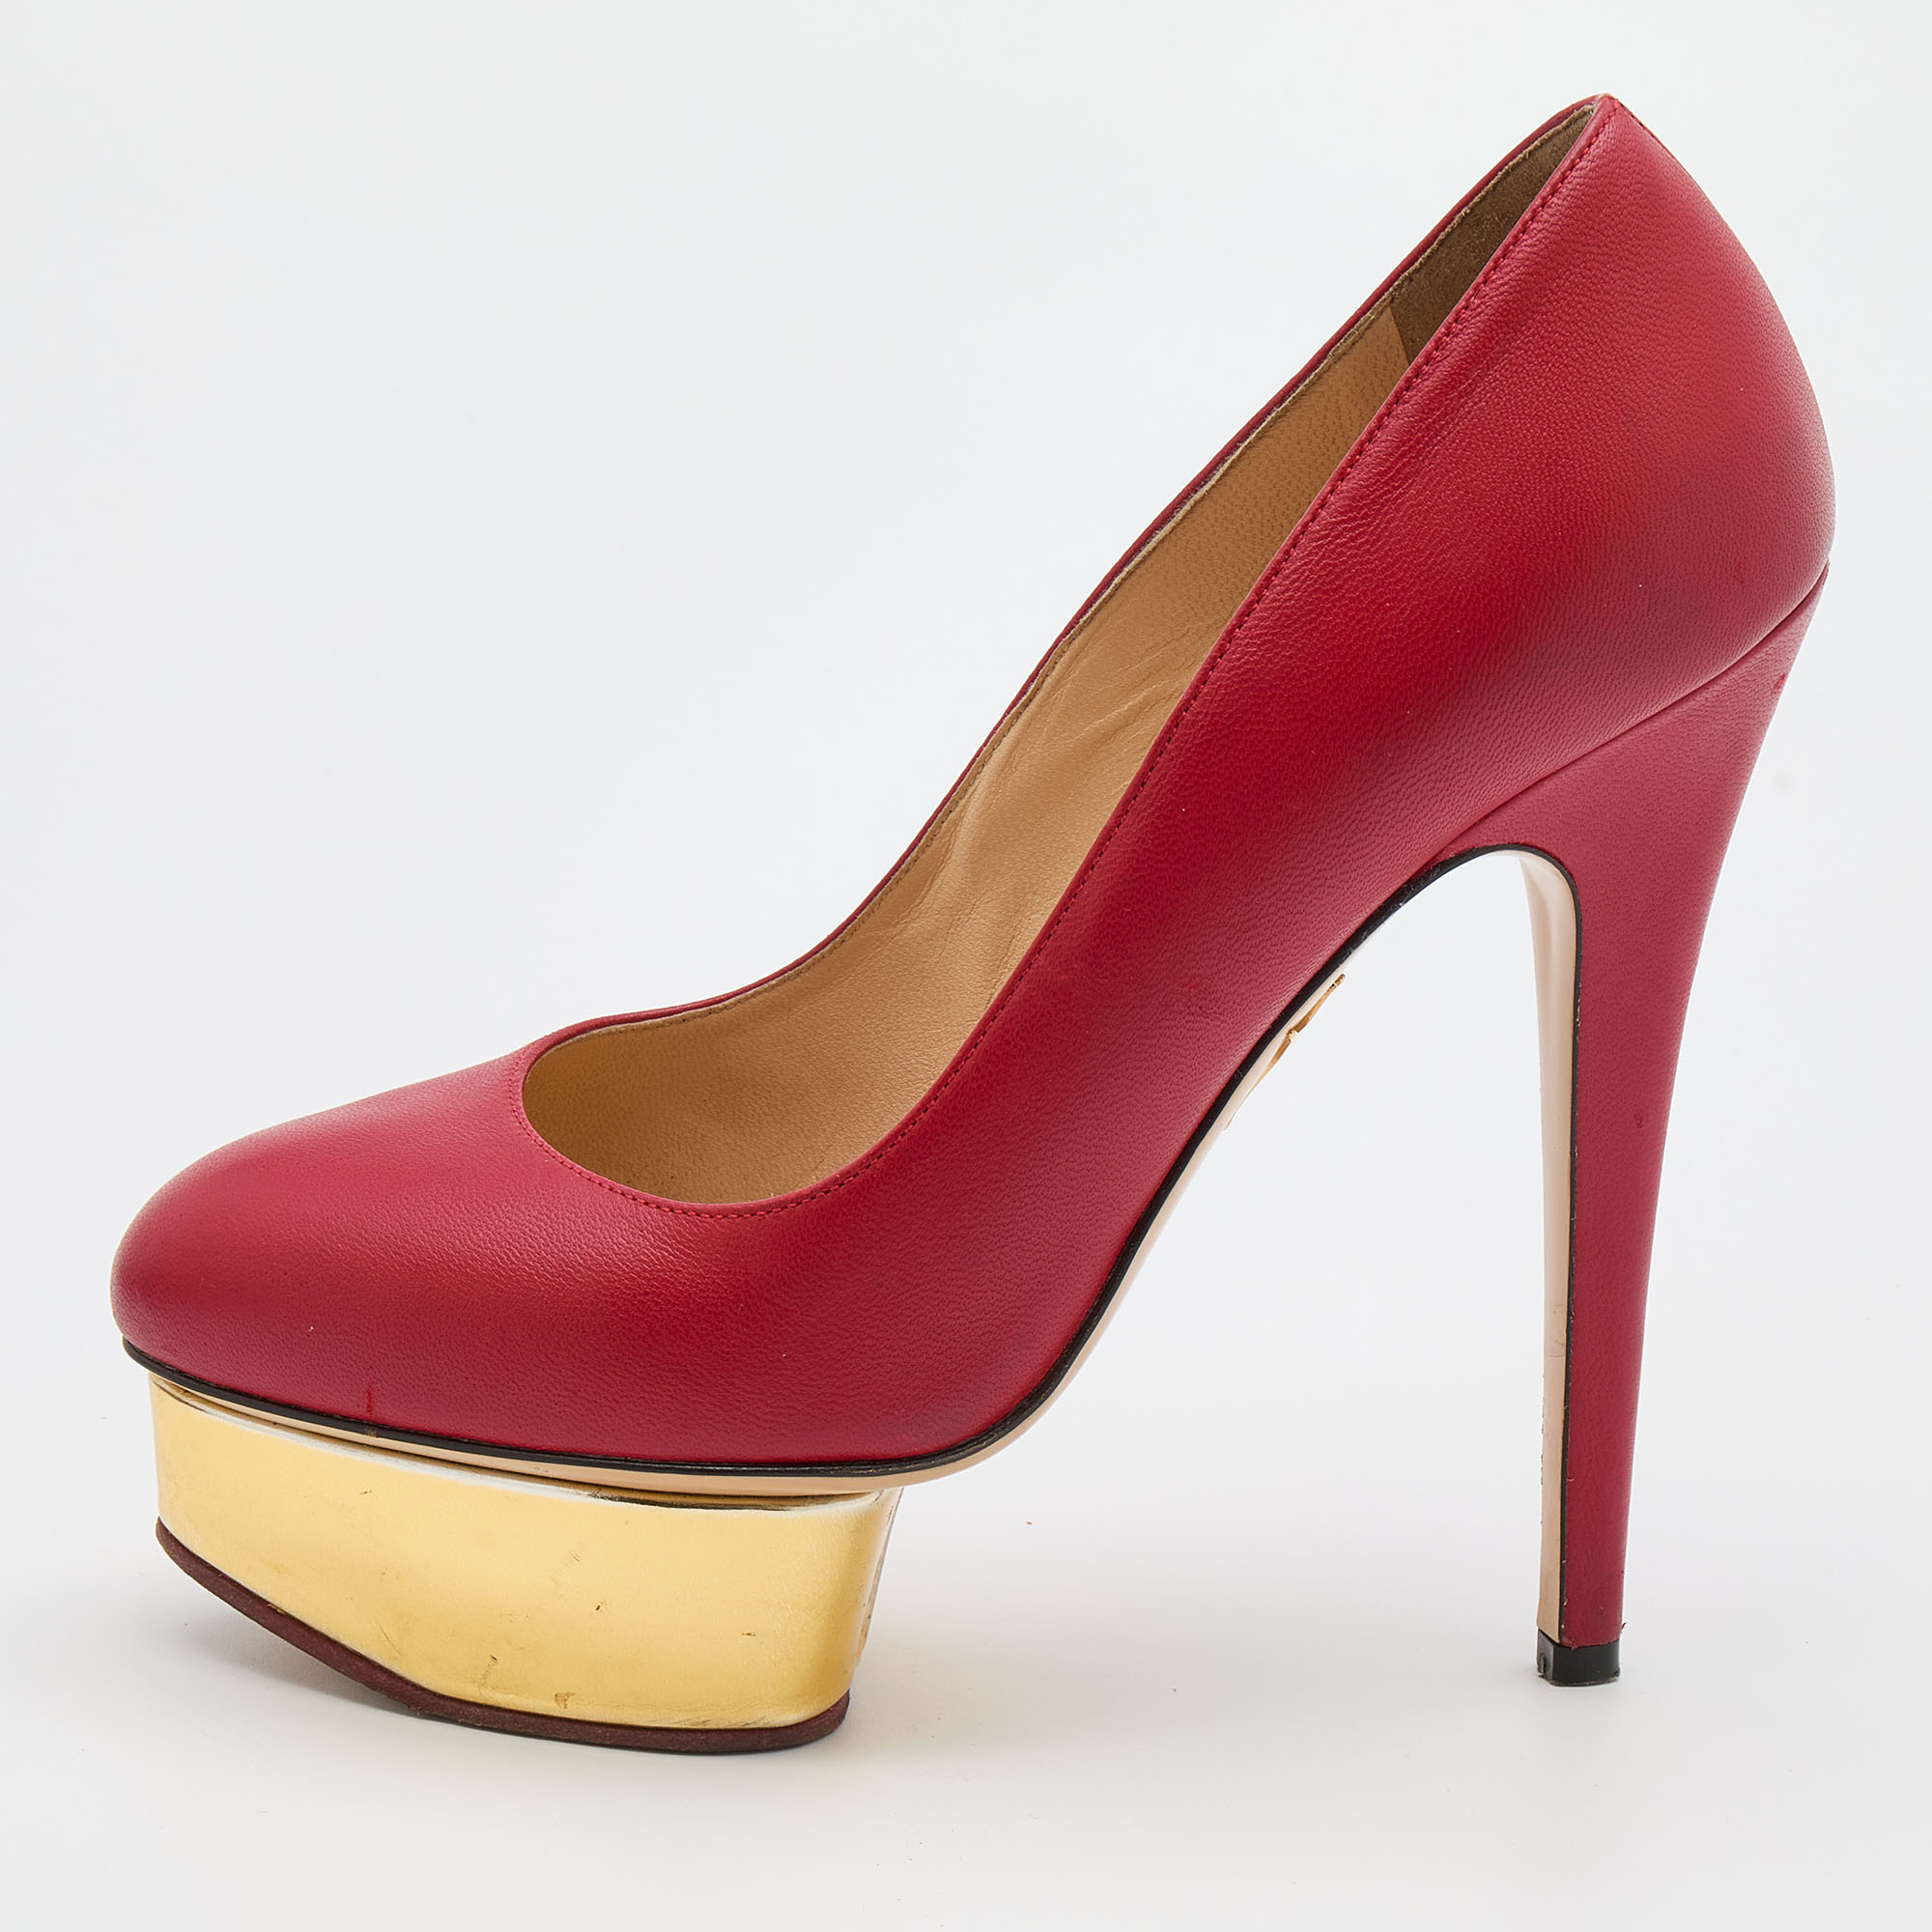 Pre-owned Charlotte Olympia Red Leather Dolly Platform Pumps Size 37